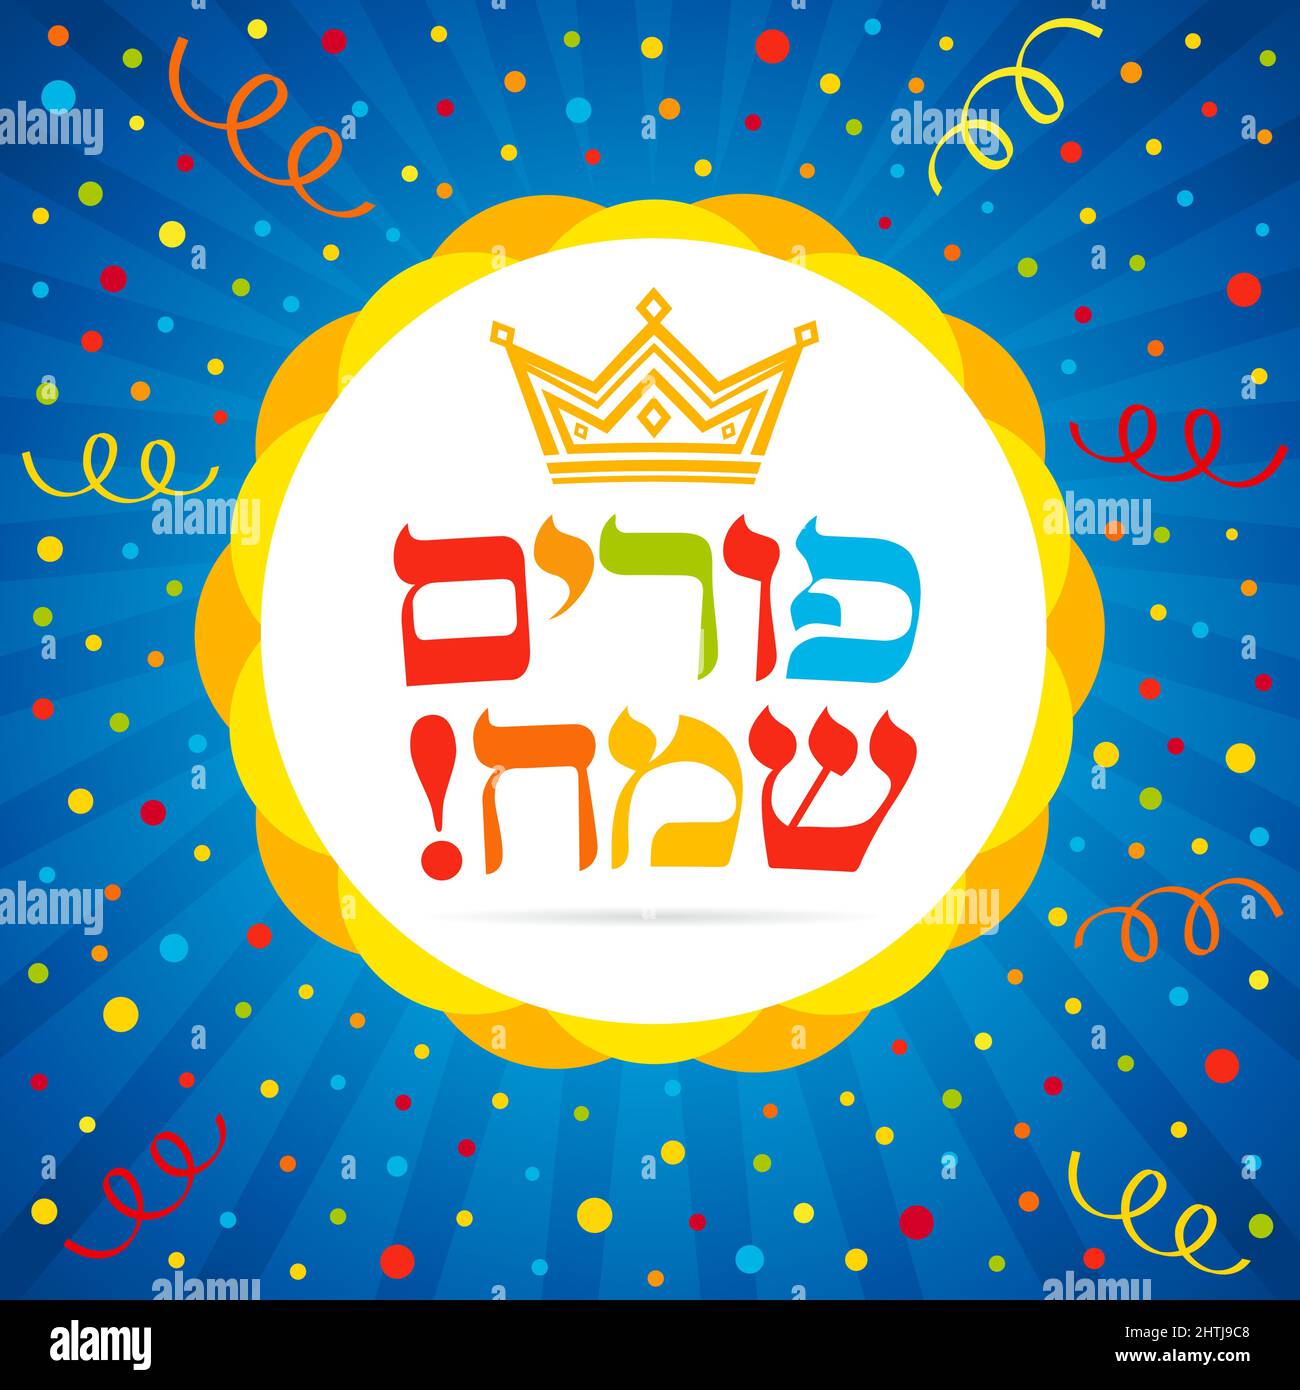 Happy purim congrats and colored confetti. Isolated abstract graphic design template. Happy Purim Jewish script, colour backdrop, king and queen carto Stock Vector